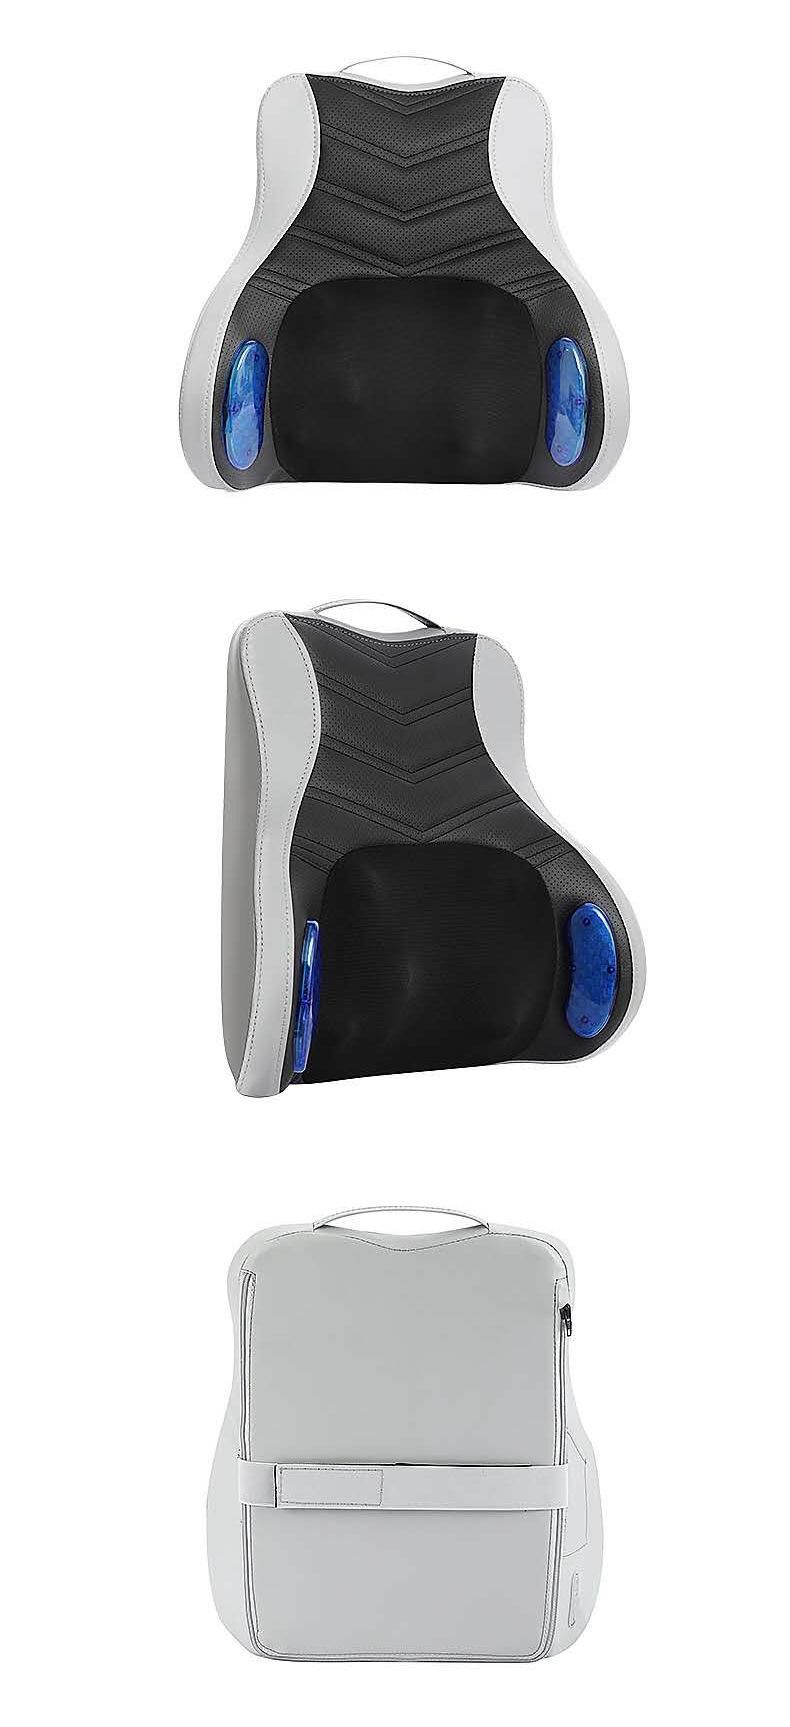 Electric Heat Therapy Function Car Seat 3D Kneading Back and Neck Massager Cushion Sale Kin Gift Body